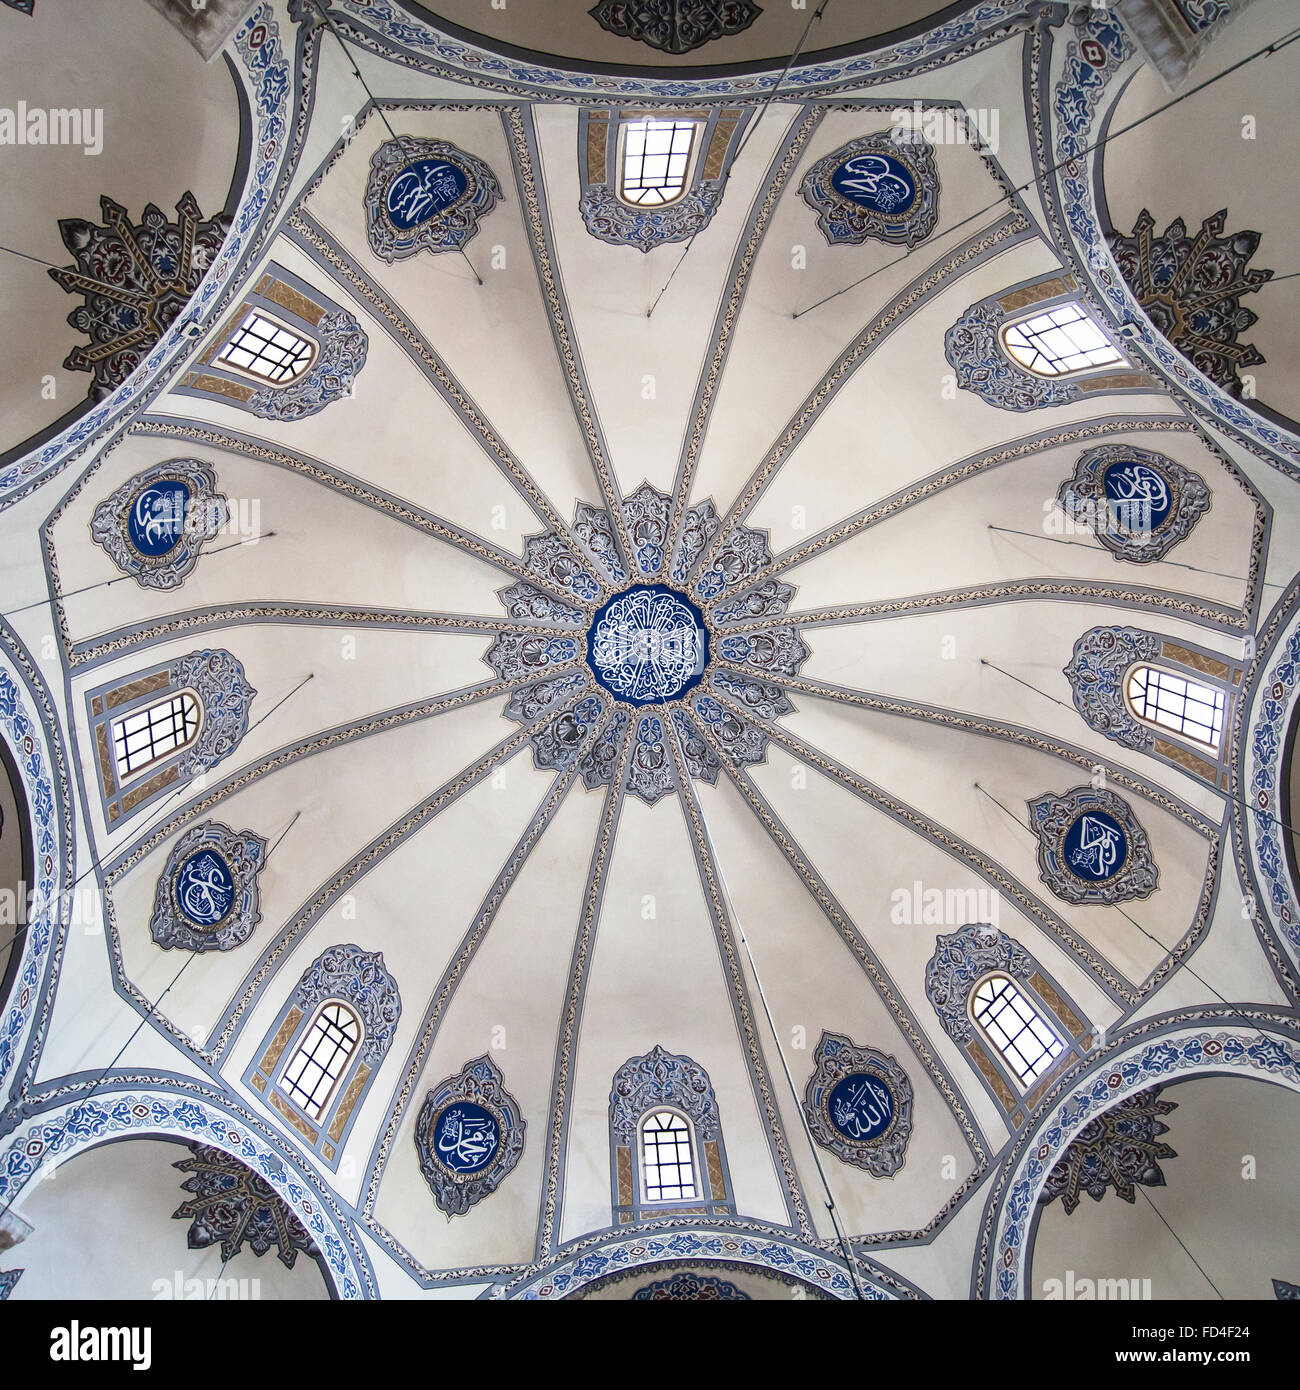 Domed ceiling of the former orthodox church of Little Hagia Sophia, Istanbul, Turkey. Stock Photo